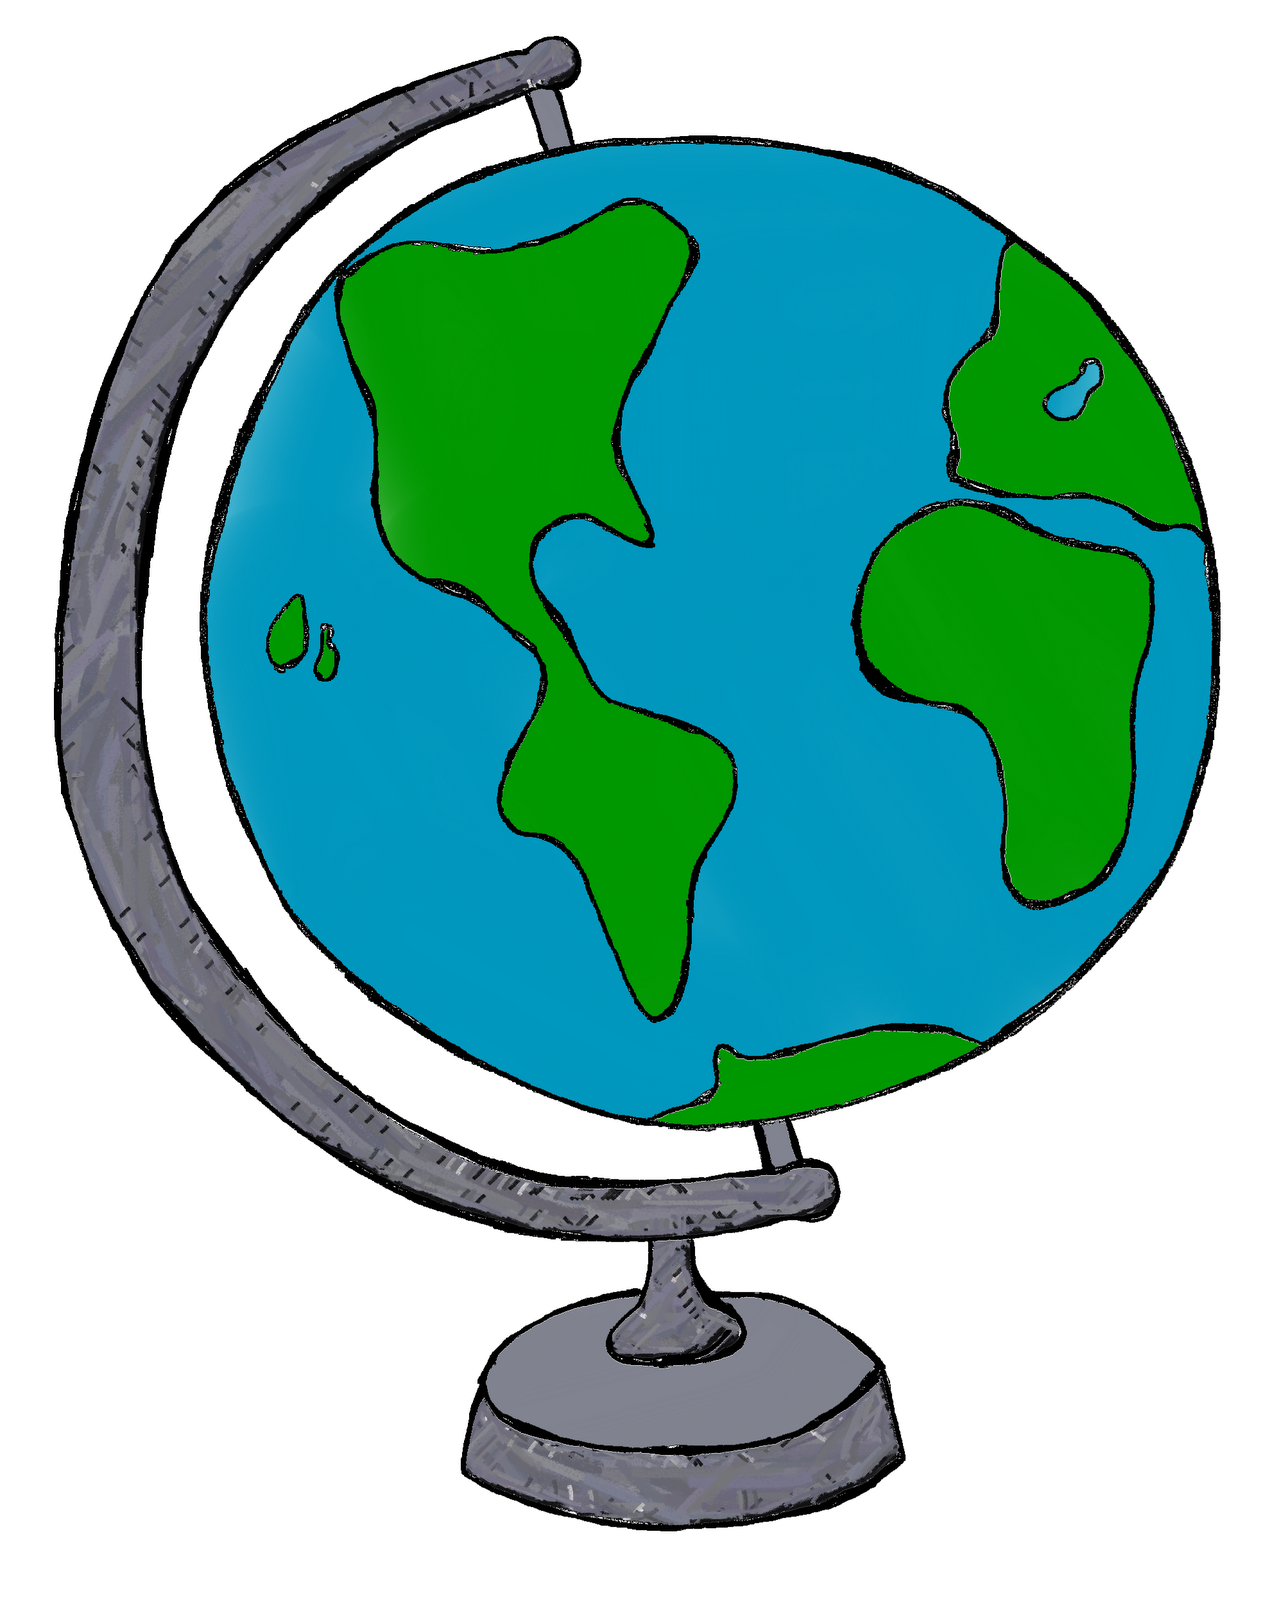 Earth Clipart Black And White | Clipart library - Free Clipart Images